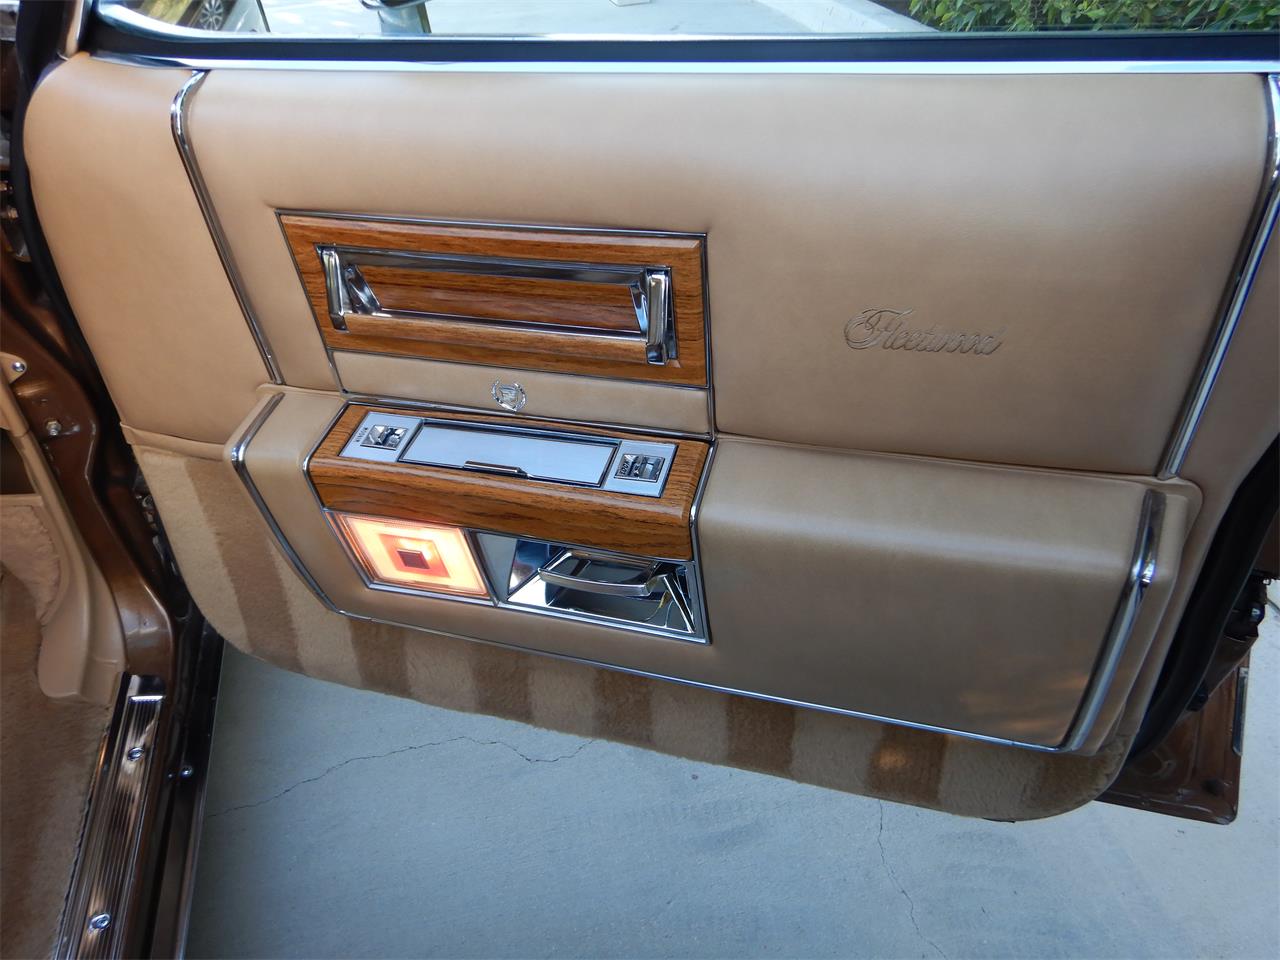 1981 Cadillac Fleetwood Brougham for sale in Woodland Hills, CA – photo 89